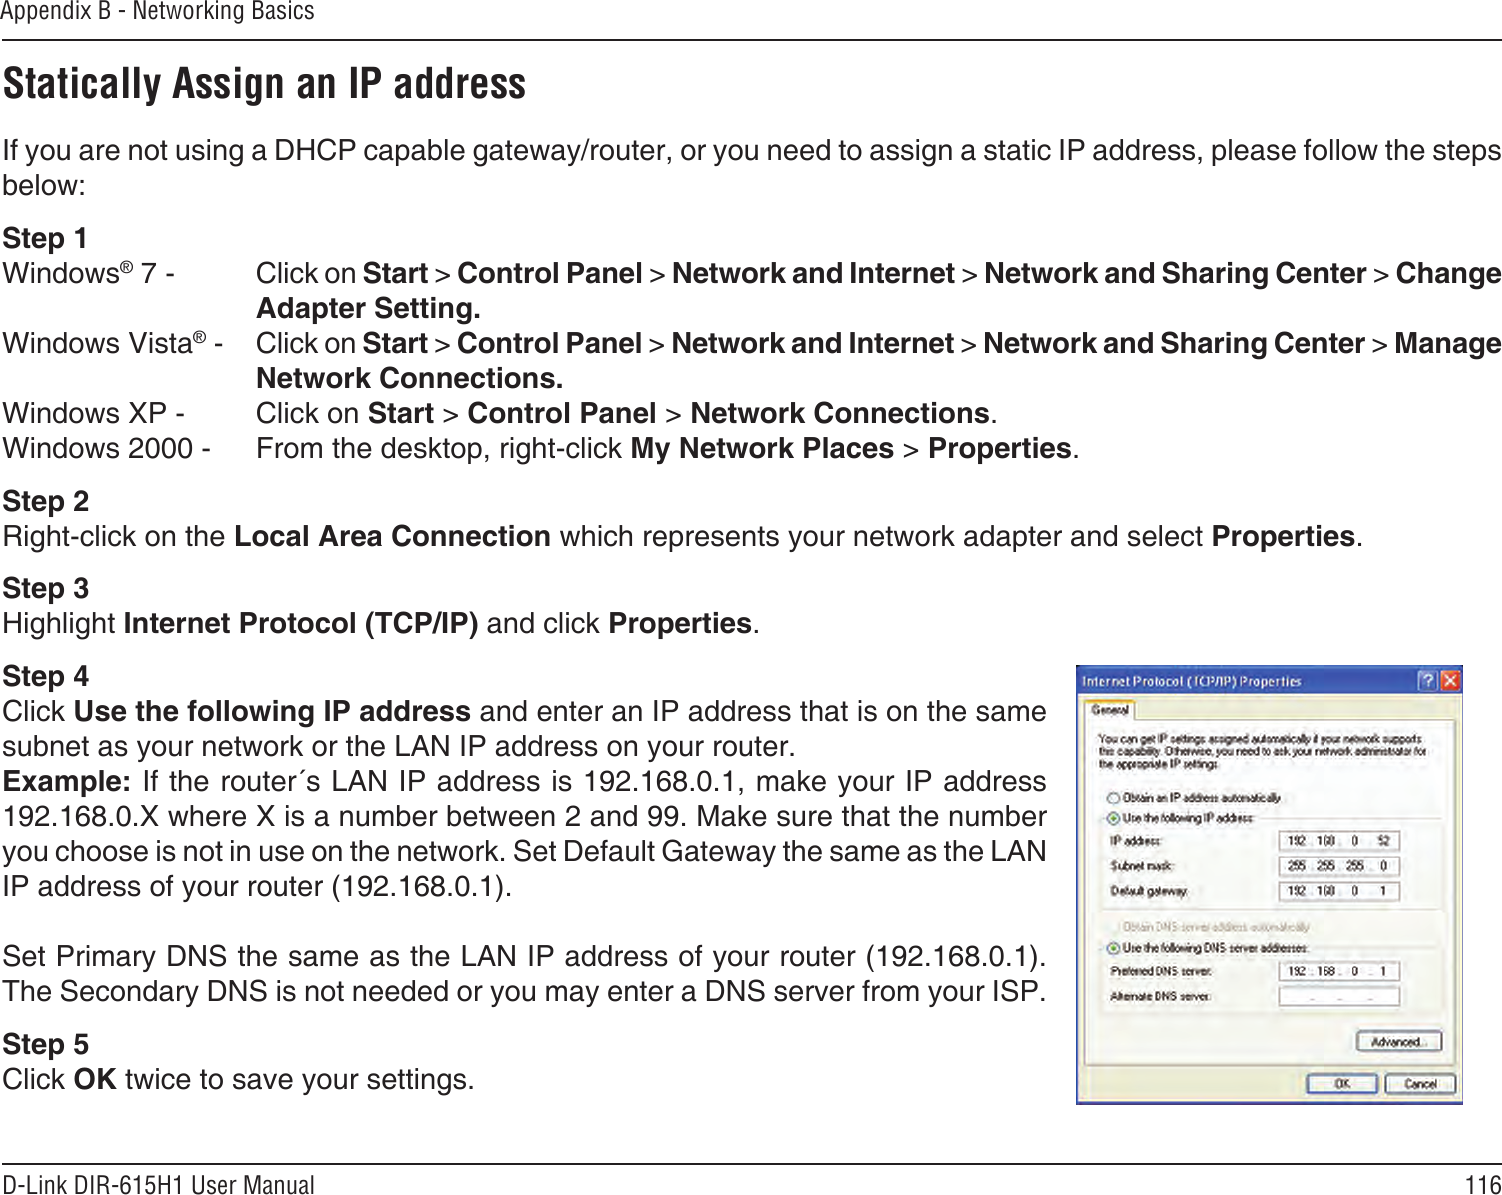 116D-Link DIR-615H1 User ManualAppendix B - Networking BasicsStatically Assign an IP addressIf you are not using a DHCP capable gateway/router, or you need to assign a static IP address, please follow the steps below:Step 1Windows® 7 -  Click on Start &gt; Control Panel &gt; Network and Internet &gt; Network and Sharing Center &gt; Change Adapter Setting. Windows Vista® -  Click on Start &gt; Control Panel &gt; Network and Internet &gt; Network and Sharing Center &gt; Manage Network Connections.Windows XP -  Click on Start &gt; Control Panel &gt; Network Connections.Windows 2000 -  From the desktop, right-click My Network Places &gt; Properties.Step 2Right-click on the Local Area Connection which represents your network adapter and select Properties.Step 3Highlight Internet Protocol (TCP/IP) and click Properties.Step 4Click Use the following IP address and enter an IP address that is on the same subnet as your network or the LAN IP address on your router. Example: If the router´s LAN IP address is 192.168.0.1, make your IP address 192.168.0.X where X is a number between 2 and 99. Make sure that the number you choose is not in use on the network. Set Default Gateway the same as the LAN IP address of your router (192.168.0.1). Set Primary DNS the same as the LAN IP address of your router (192.168.0.1). The Secondary DNS is not needed or you may enter a DNS server from your ISP.Step 5Click OK twice to save your settings.